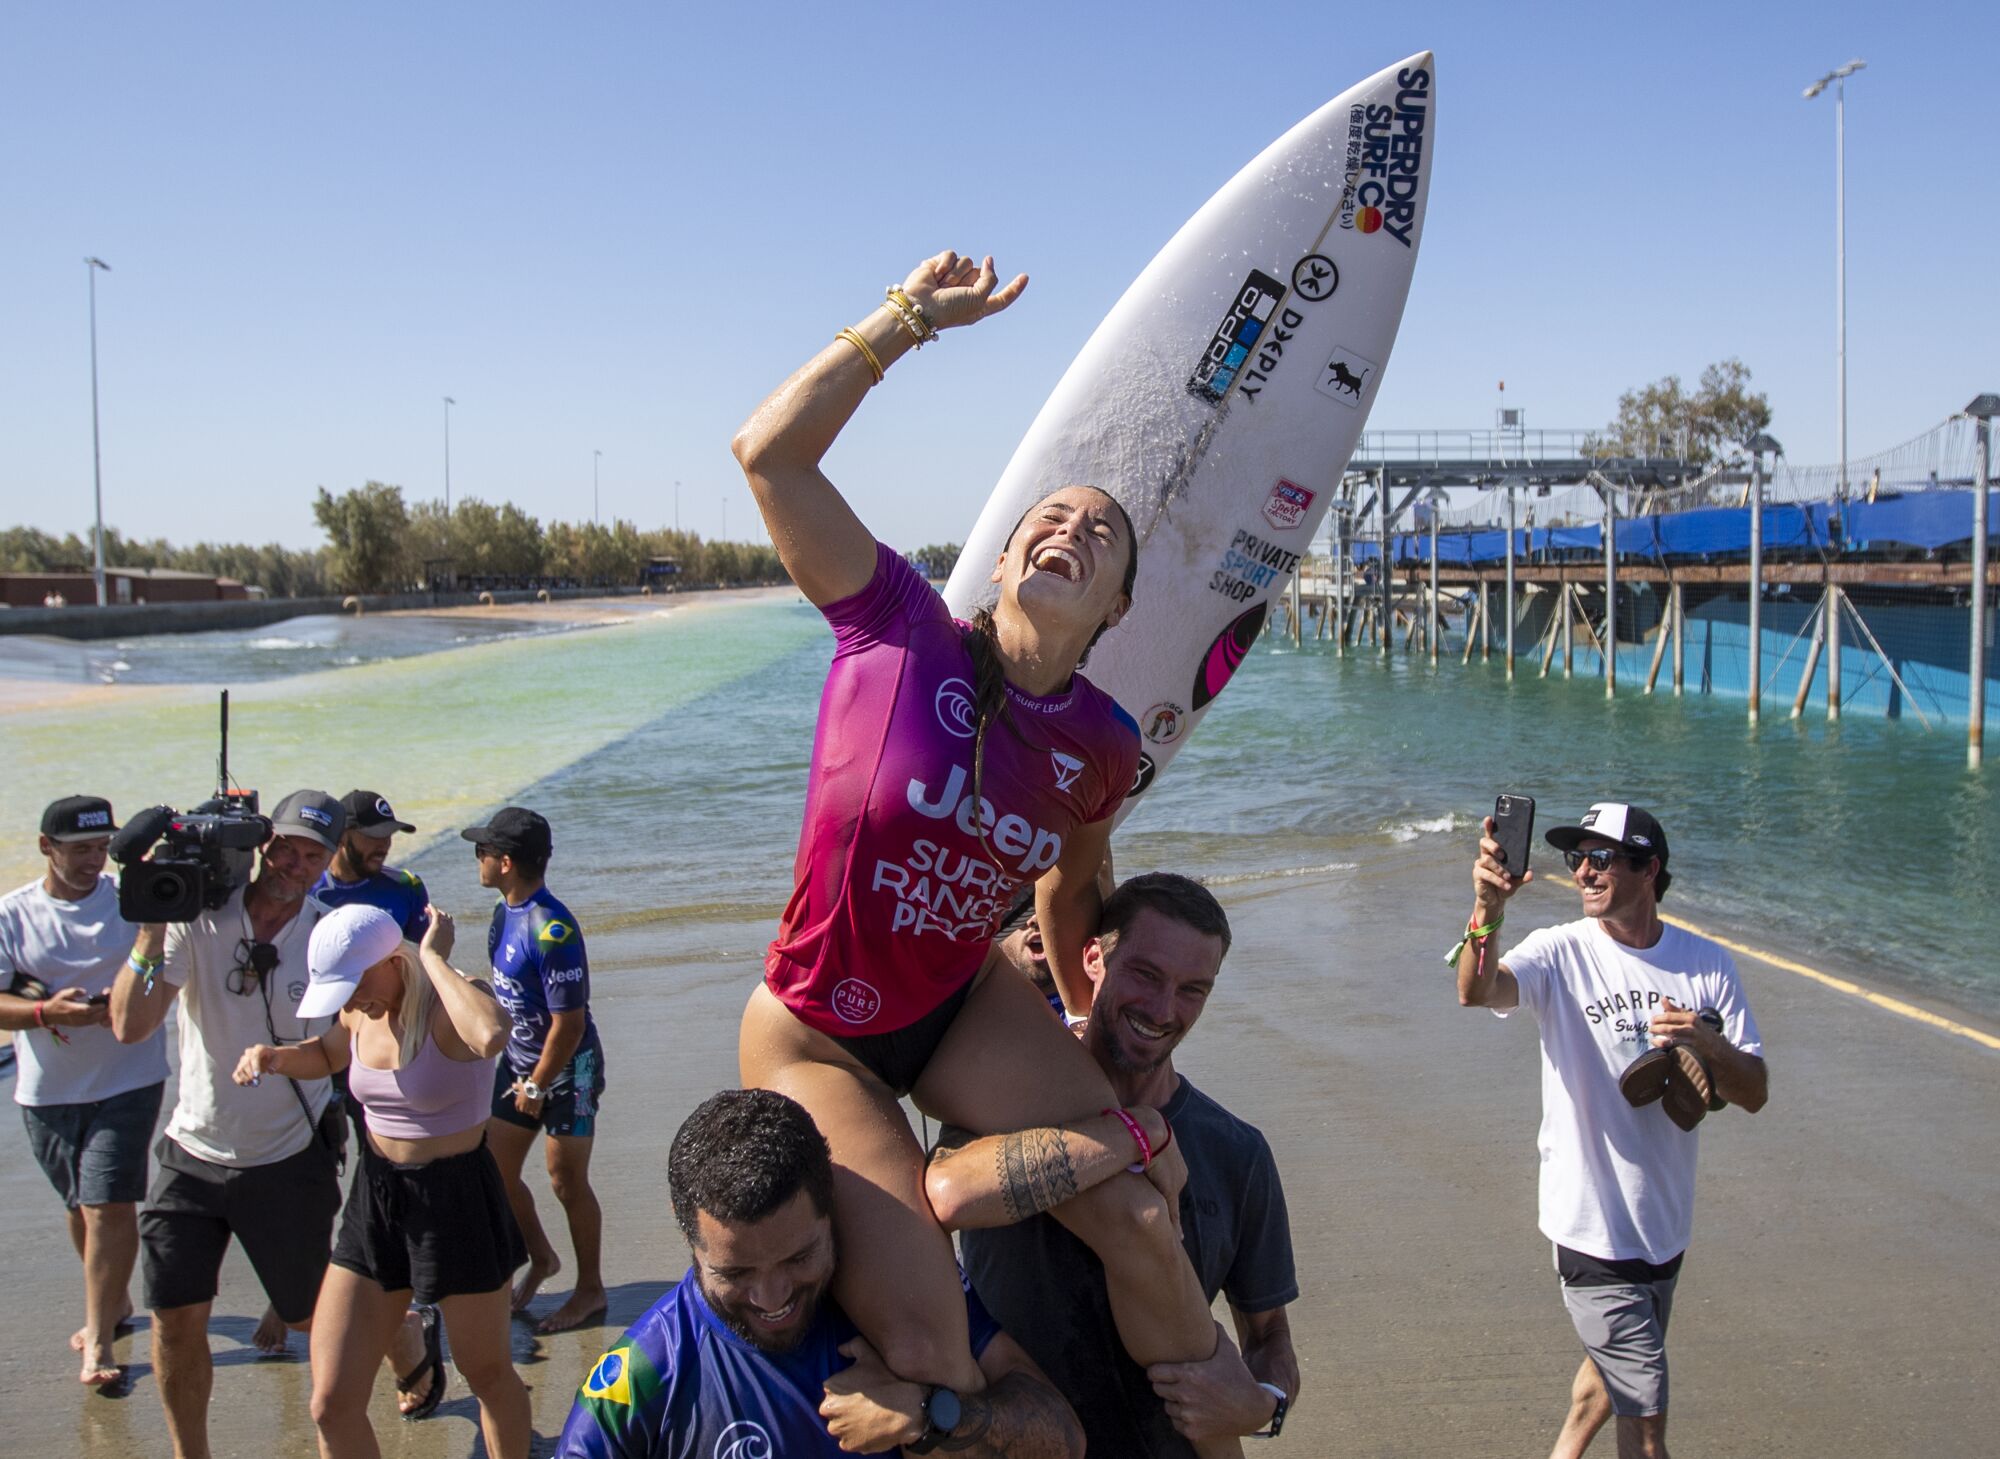 Johanne Defay is carried on friends' shoulders after winning the Jeep Surf Ranch Pro women’s event.